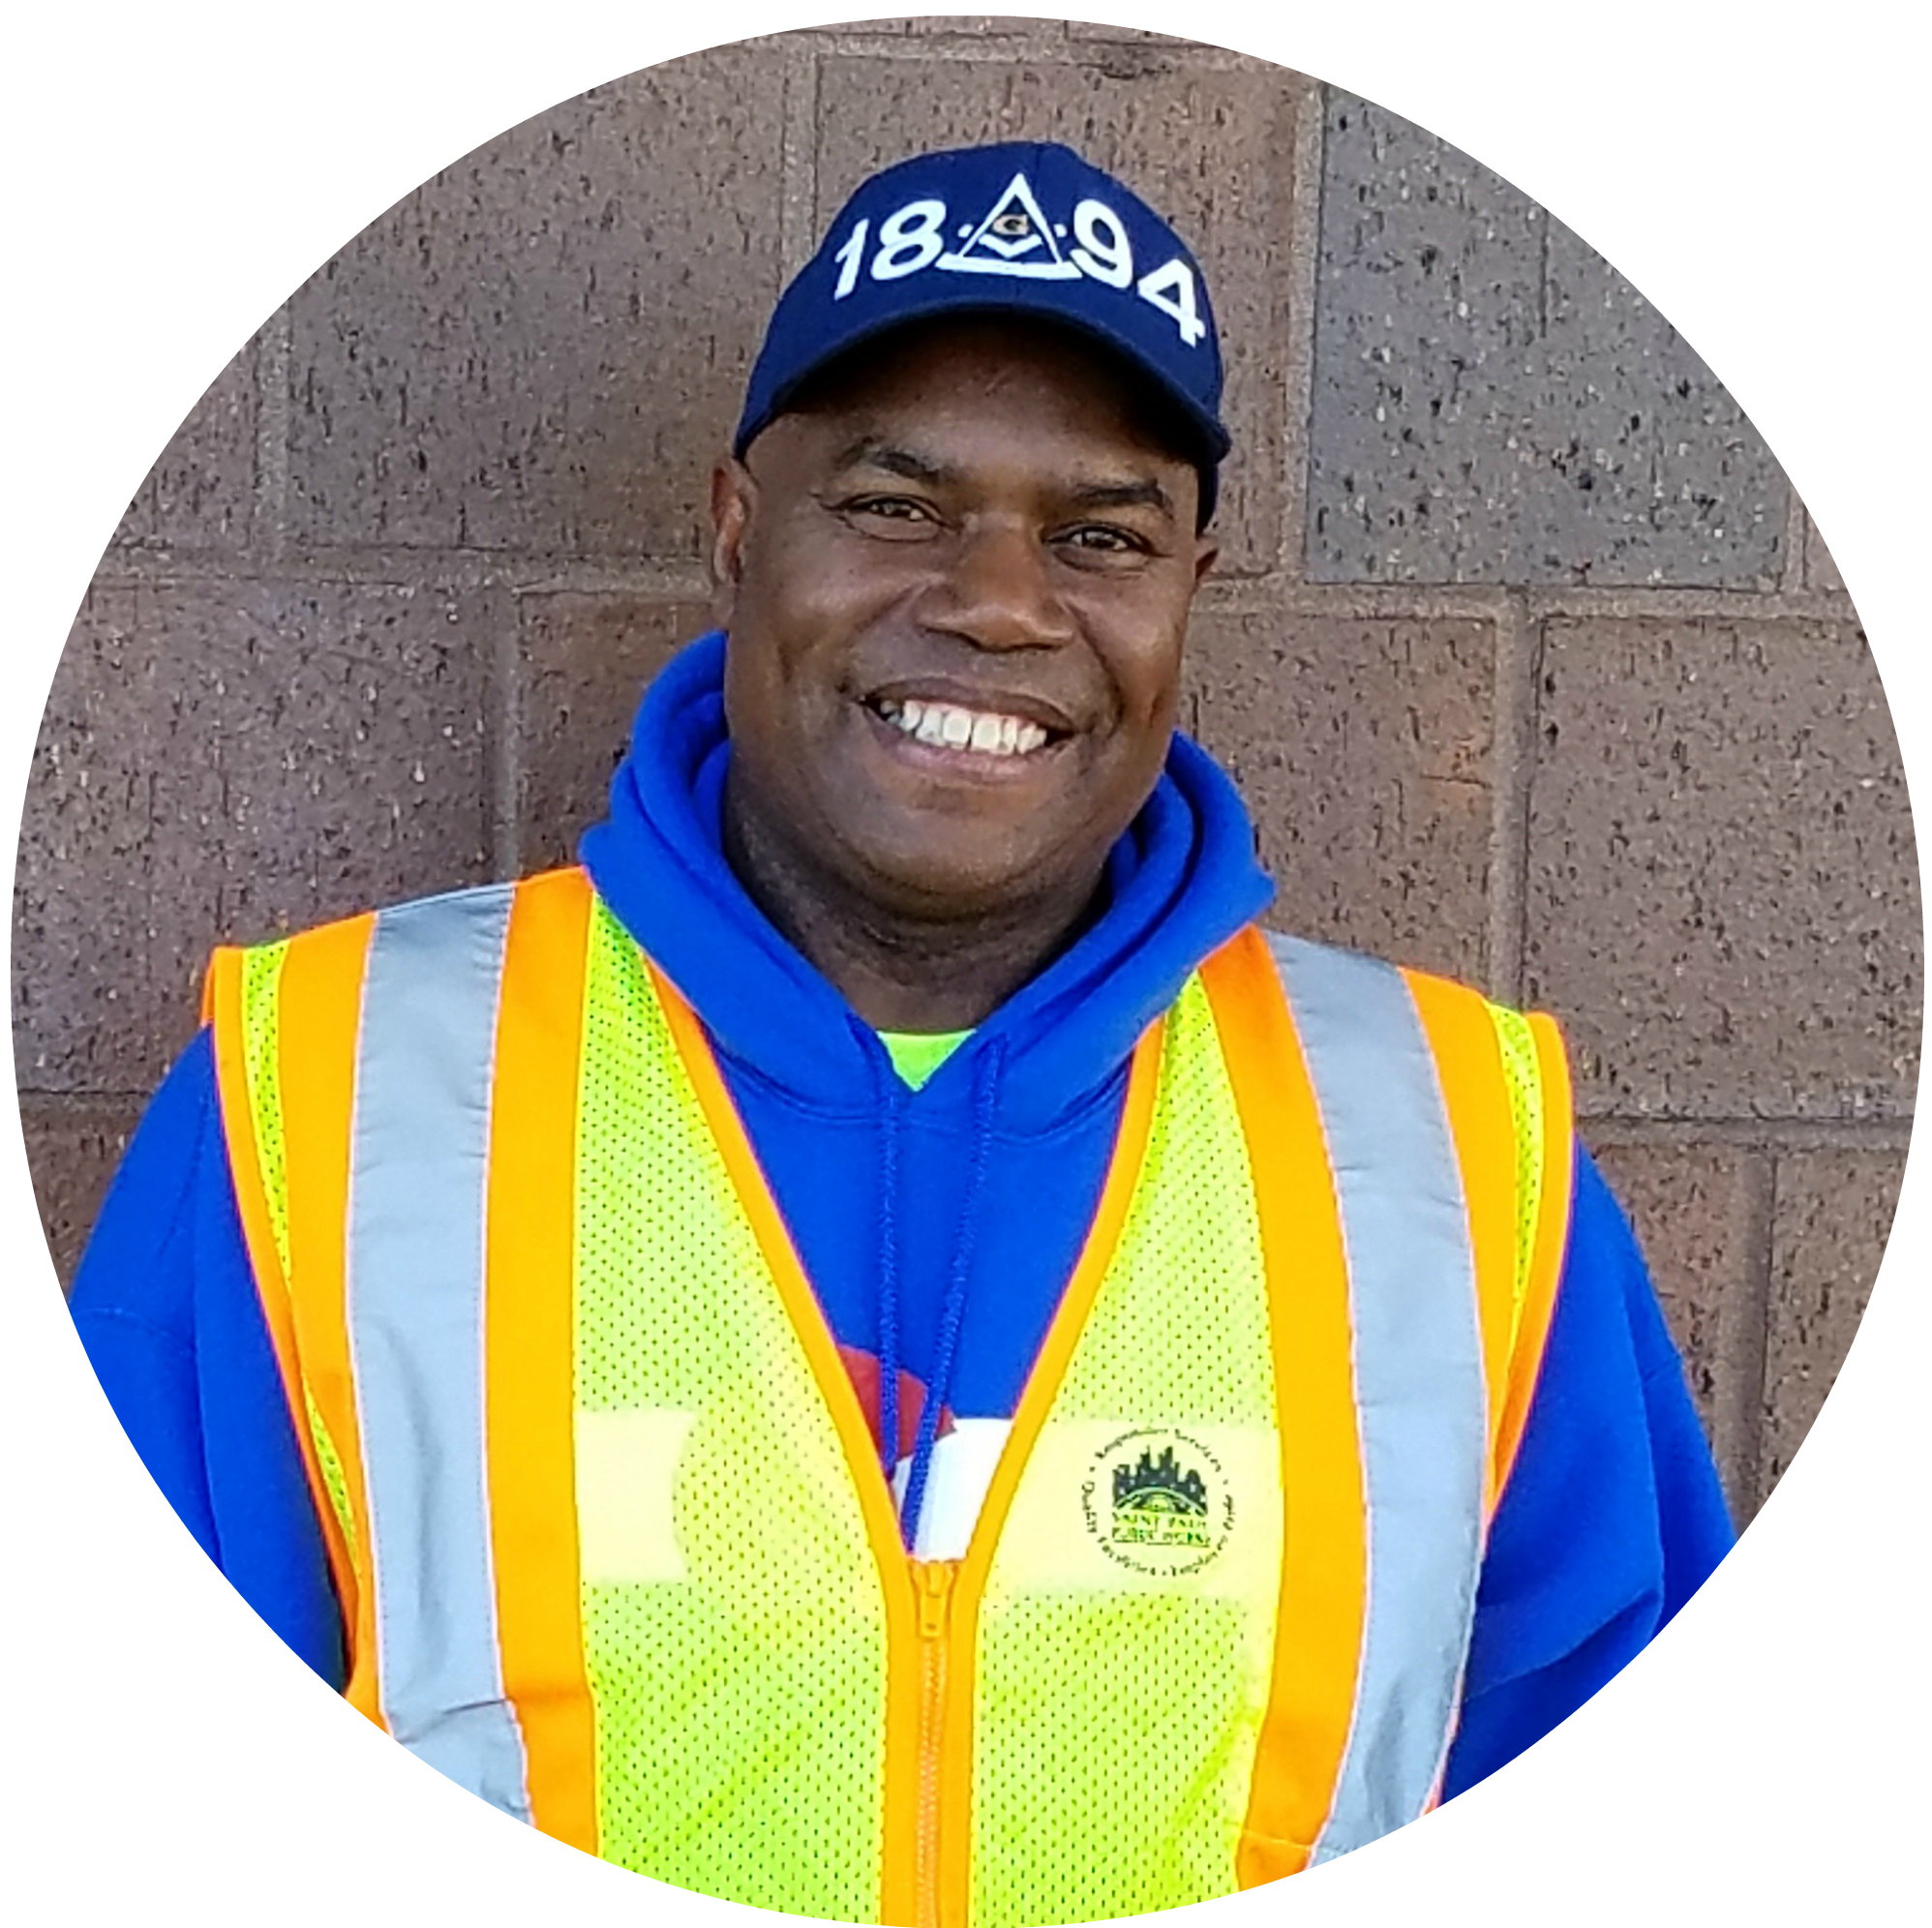 Andy-Street Services Worker